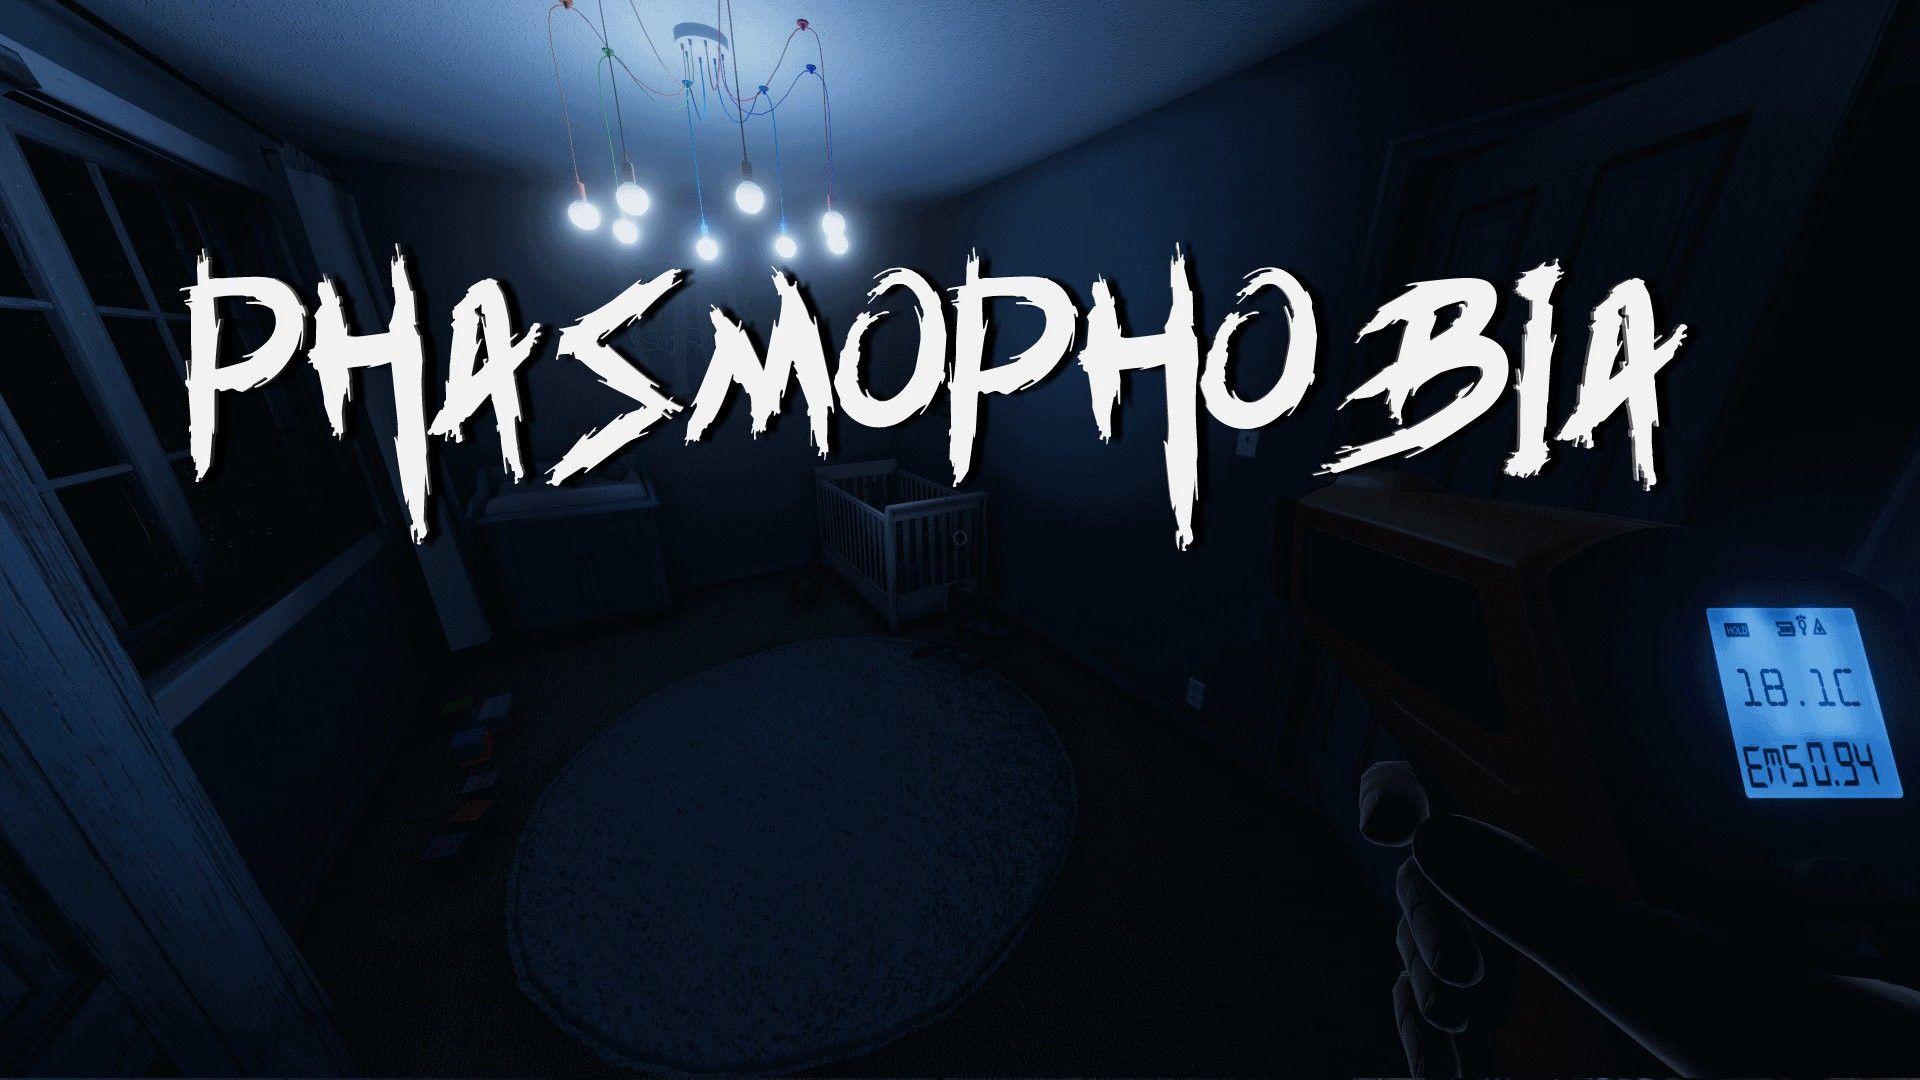 Phasmophobia Wallpapers Top Free Phasmophobia Backgrounds